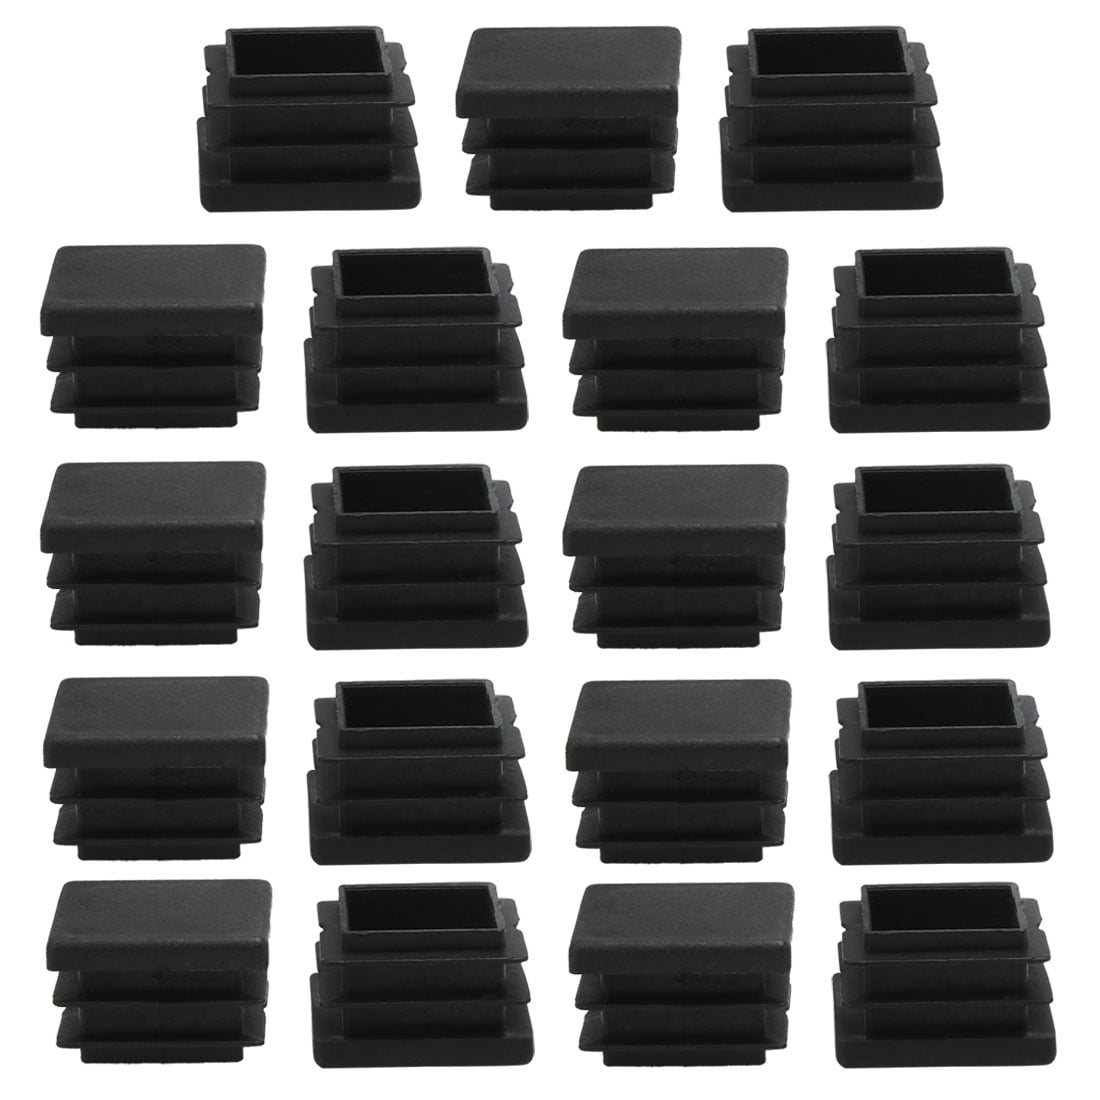 uxcell PVC Chair Leg Cap End Tip Feet Cover Furniture Glide Desk Table Floor Protector 50pcs 0.75 x 0.75 Reduce Noise Prevent Scratch 19x19mm Inner Size